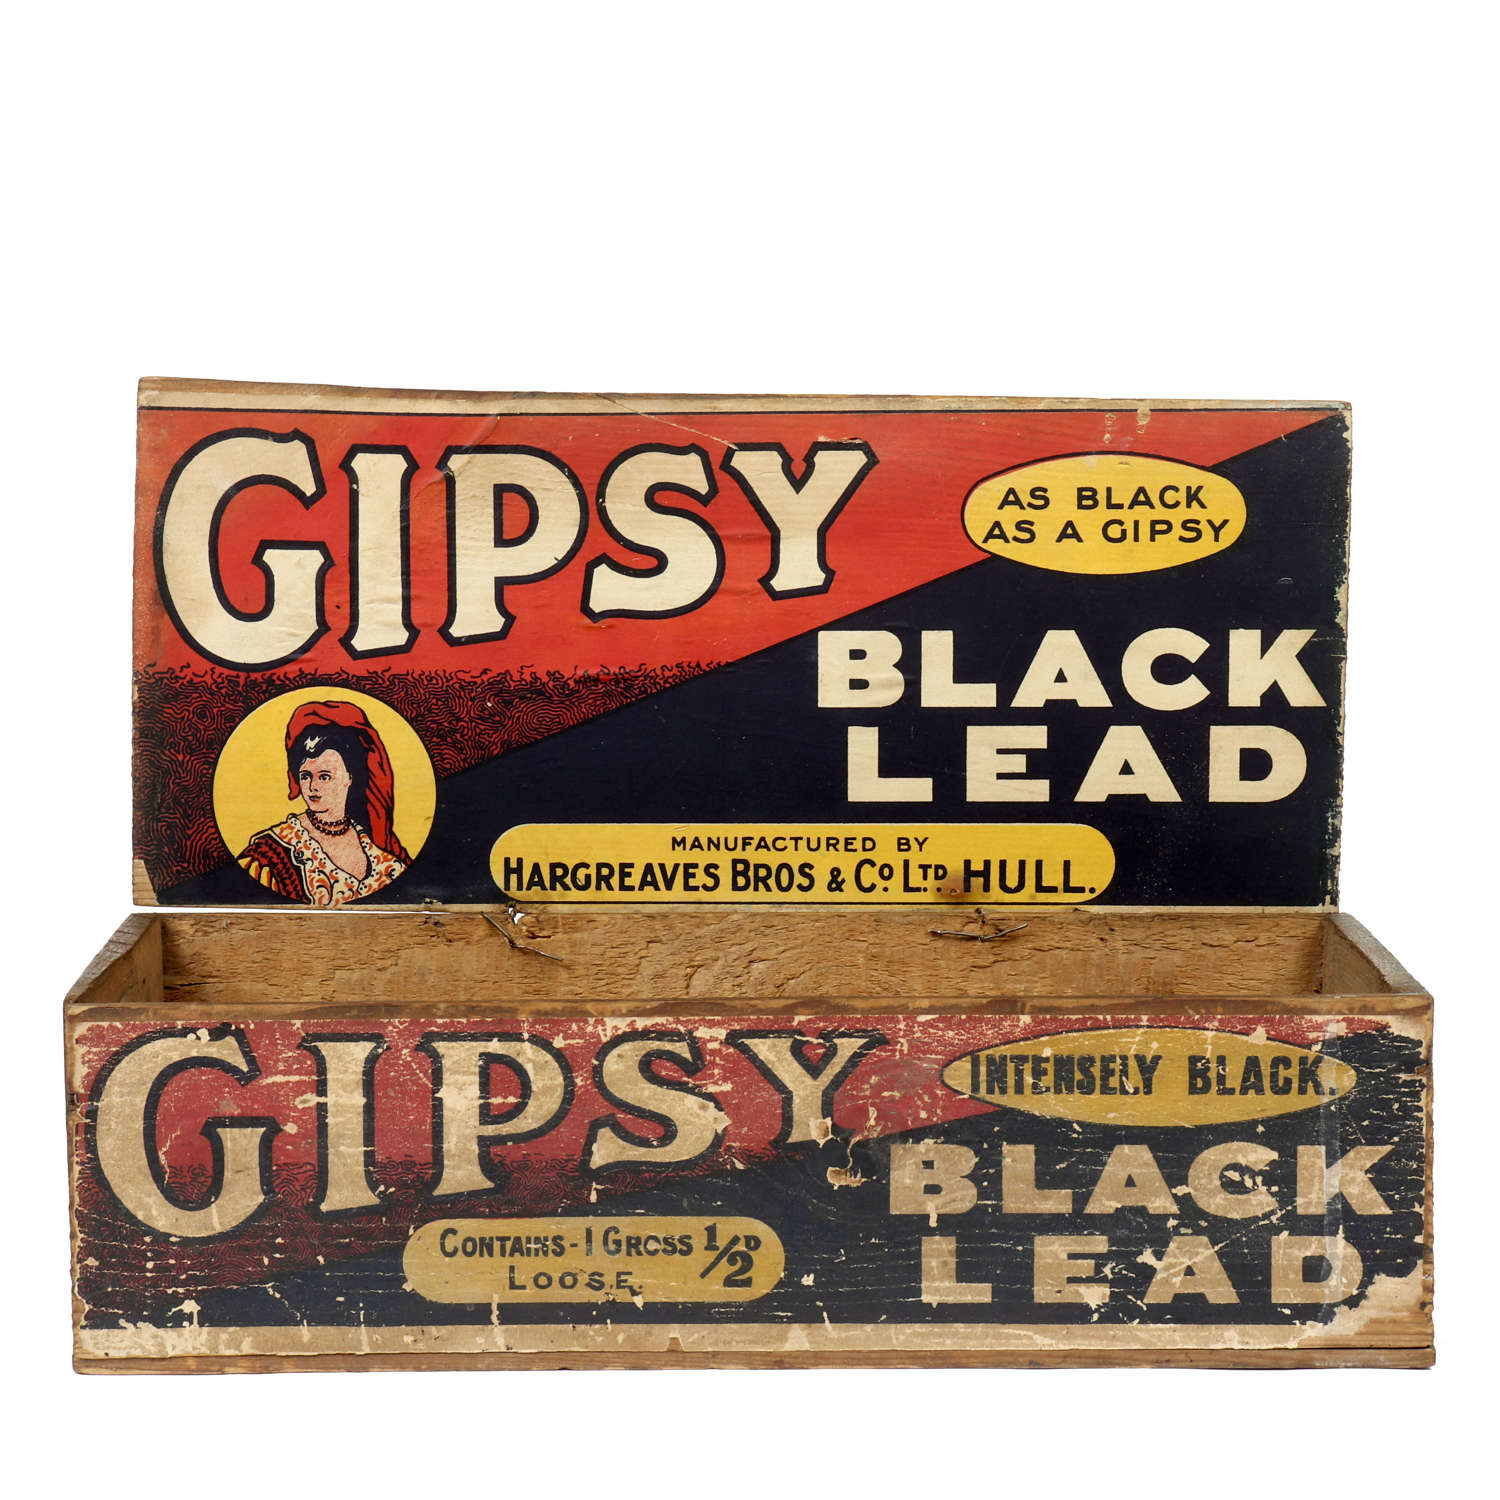 Gipsy Black Lead shop delivery and display box